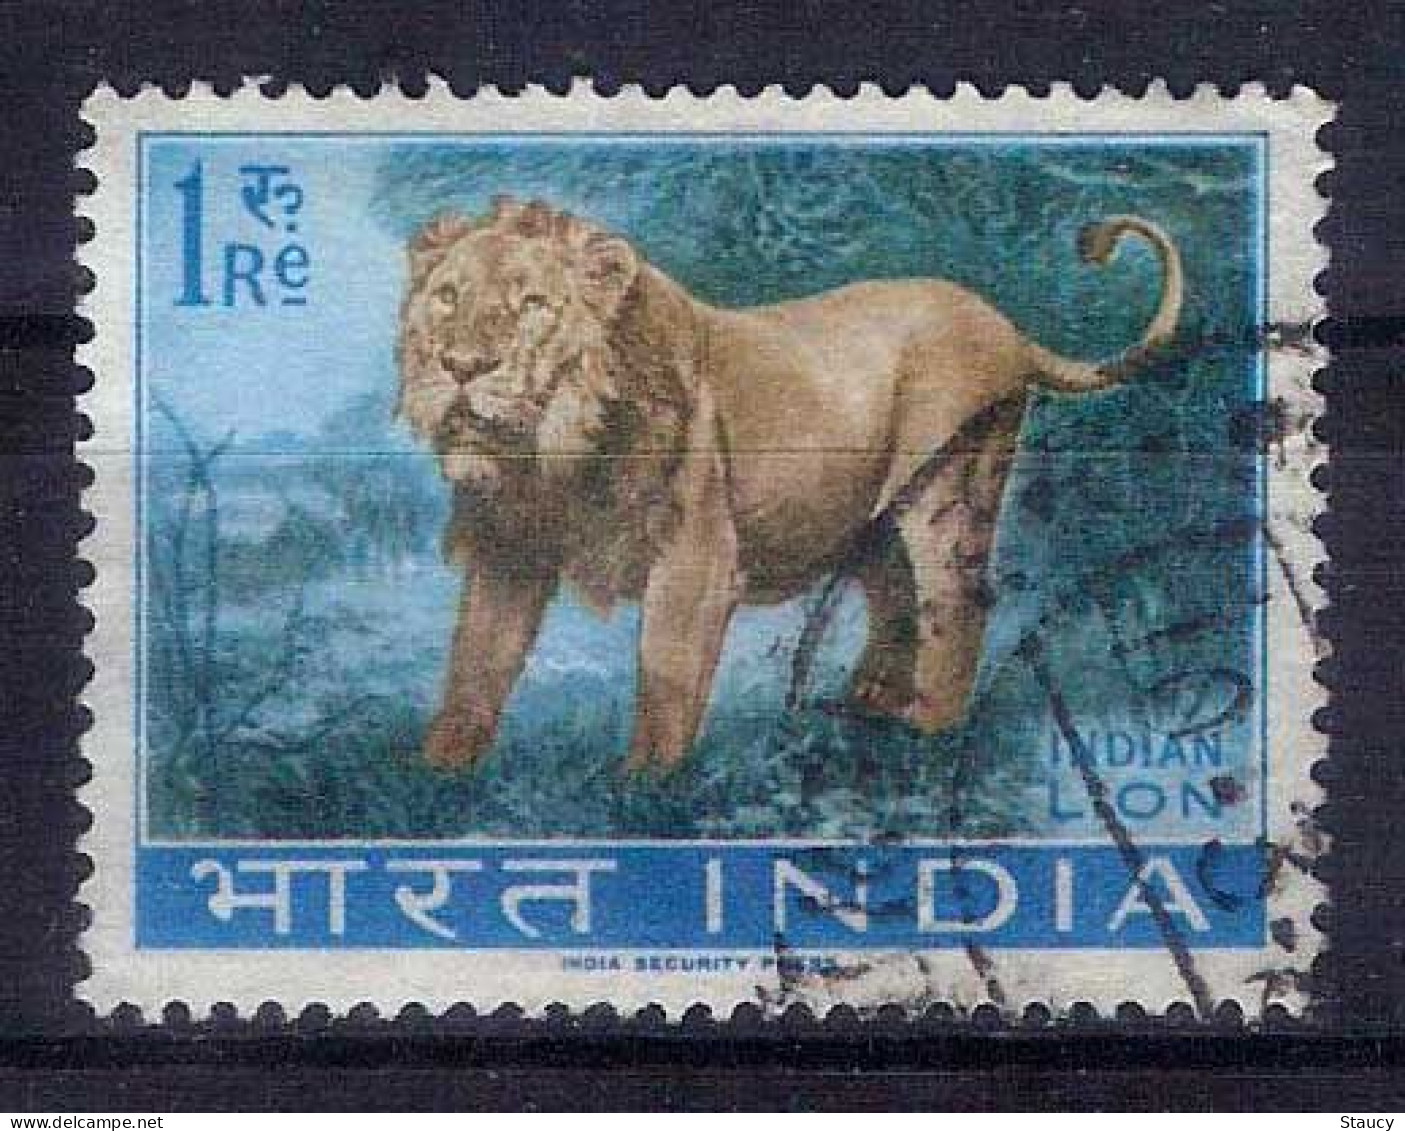 India 1963 ~ Wildlife Preservation - Fauna / Wild Animals 1v Stamp LION USED (Cancellation Would Differ) - Usados